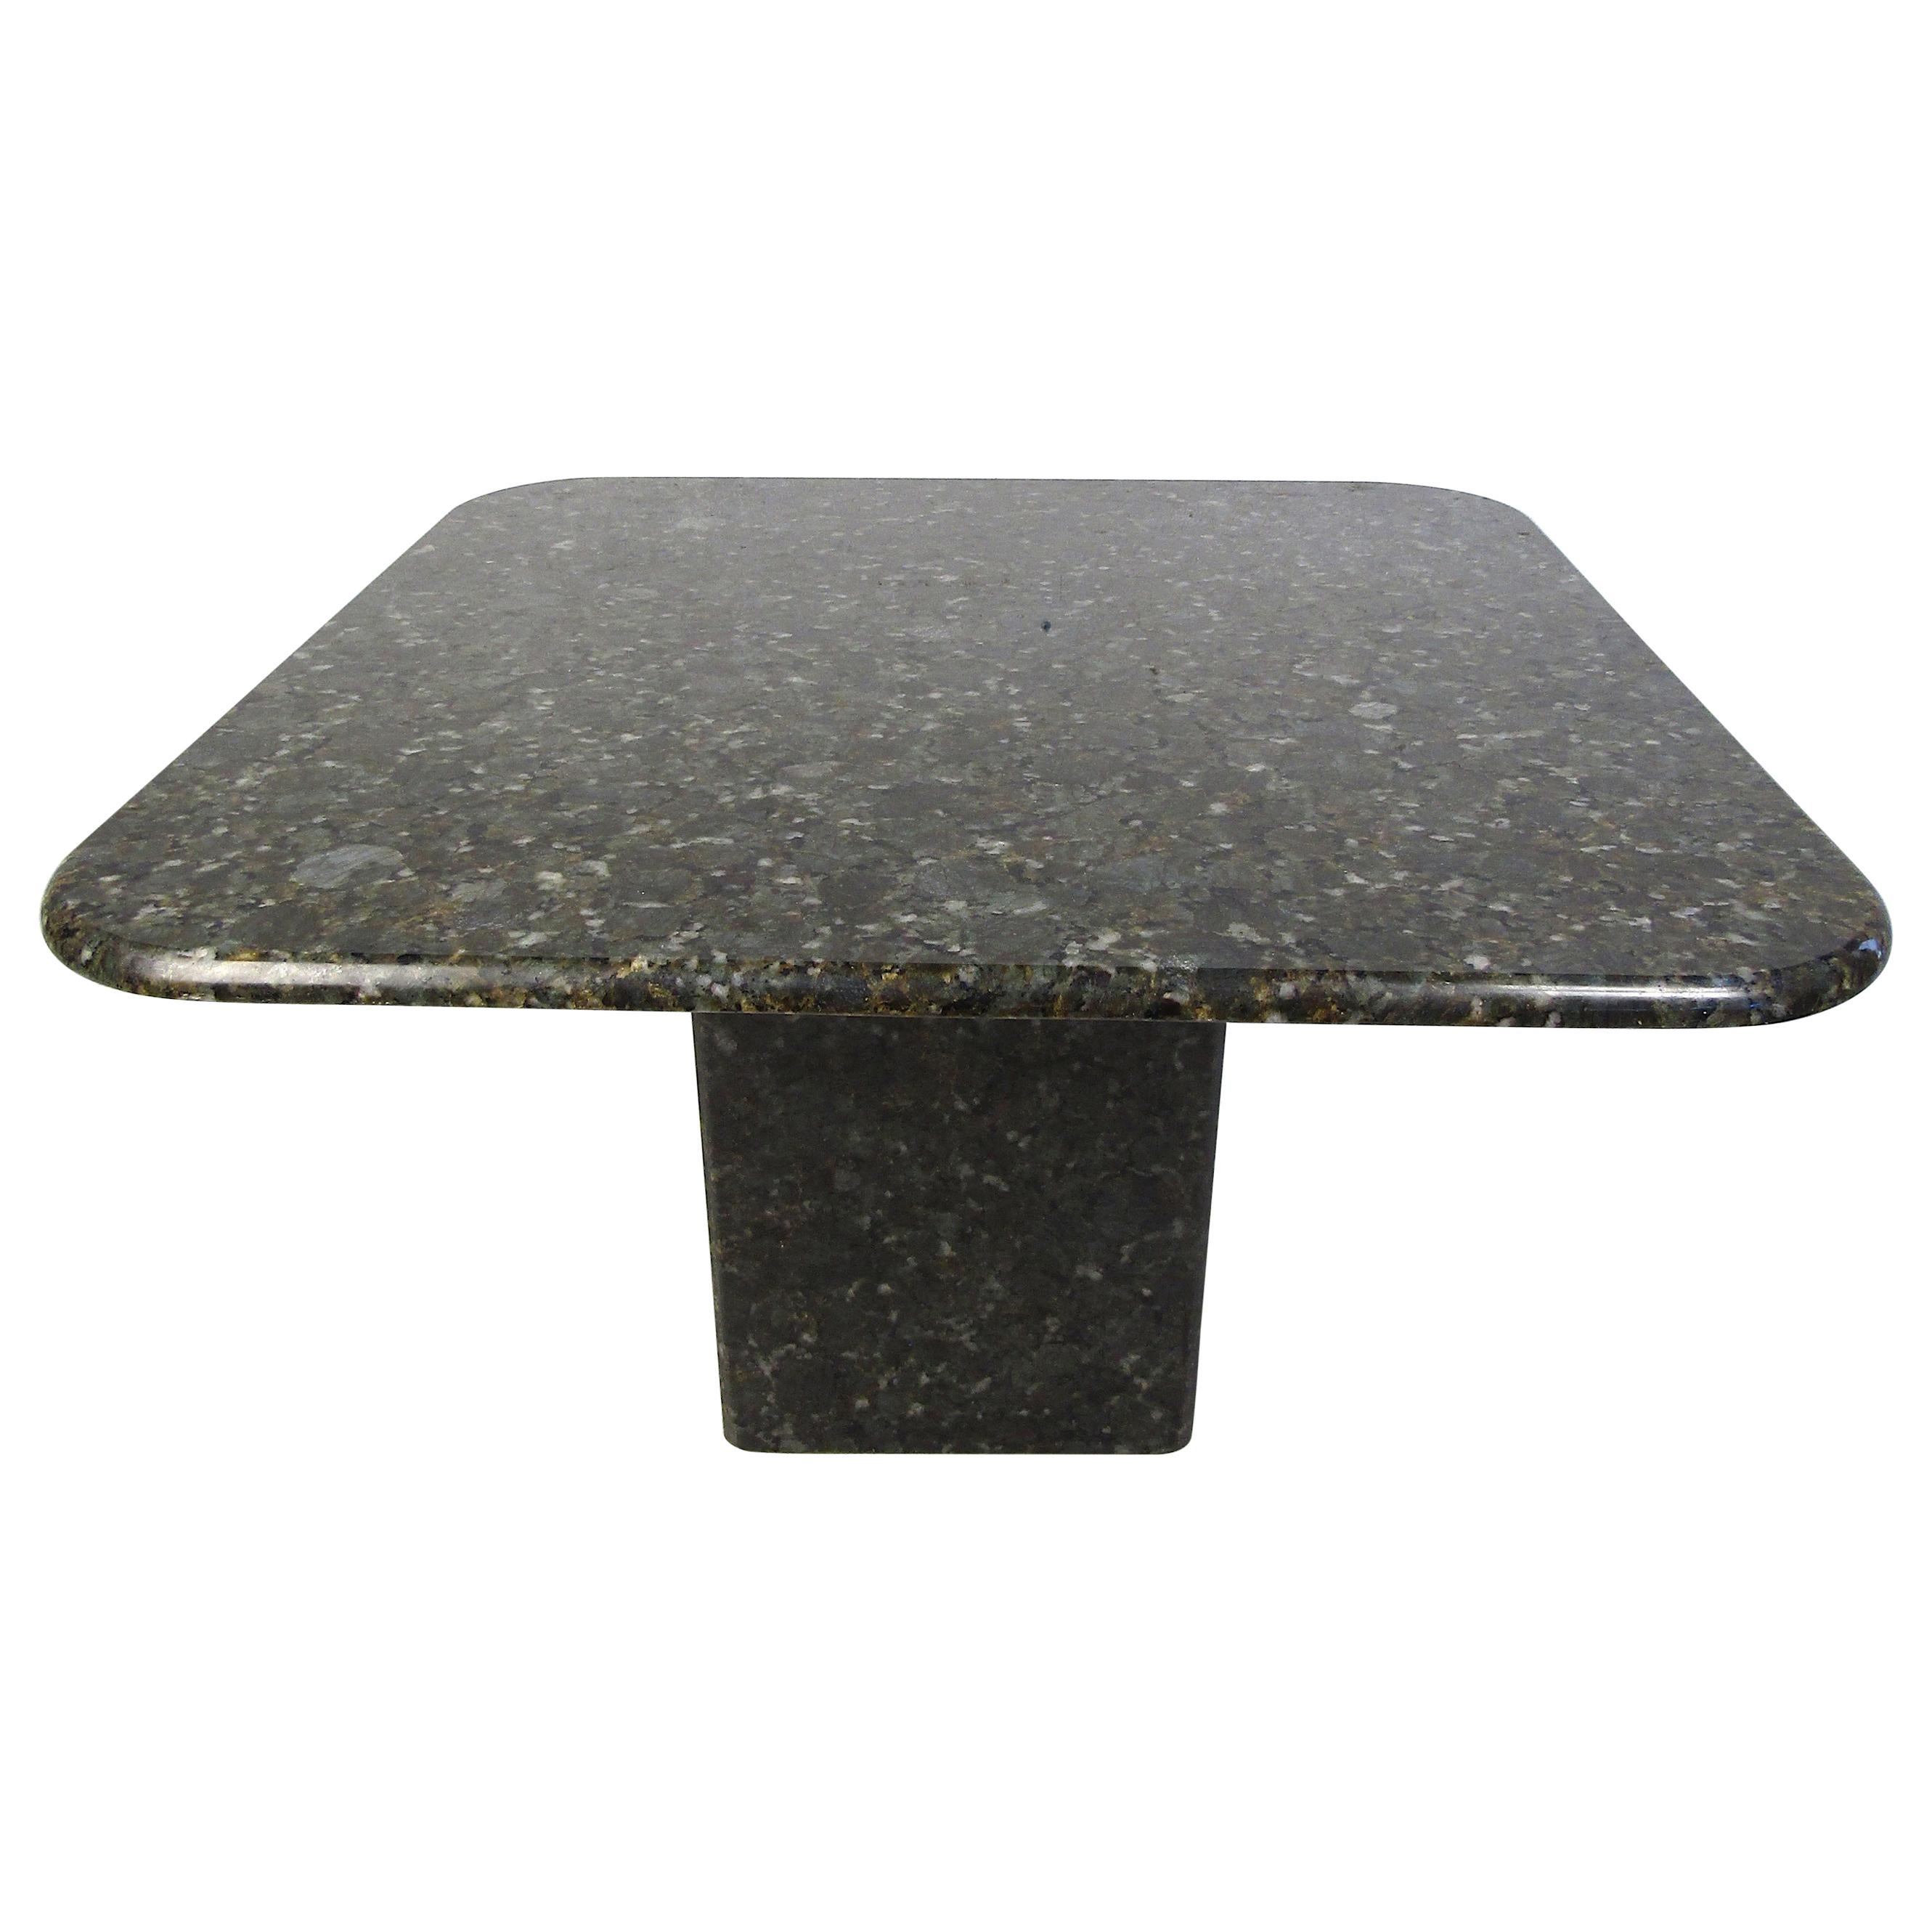 Granite Square Outdoor Dining Table For Sale